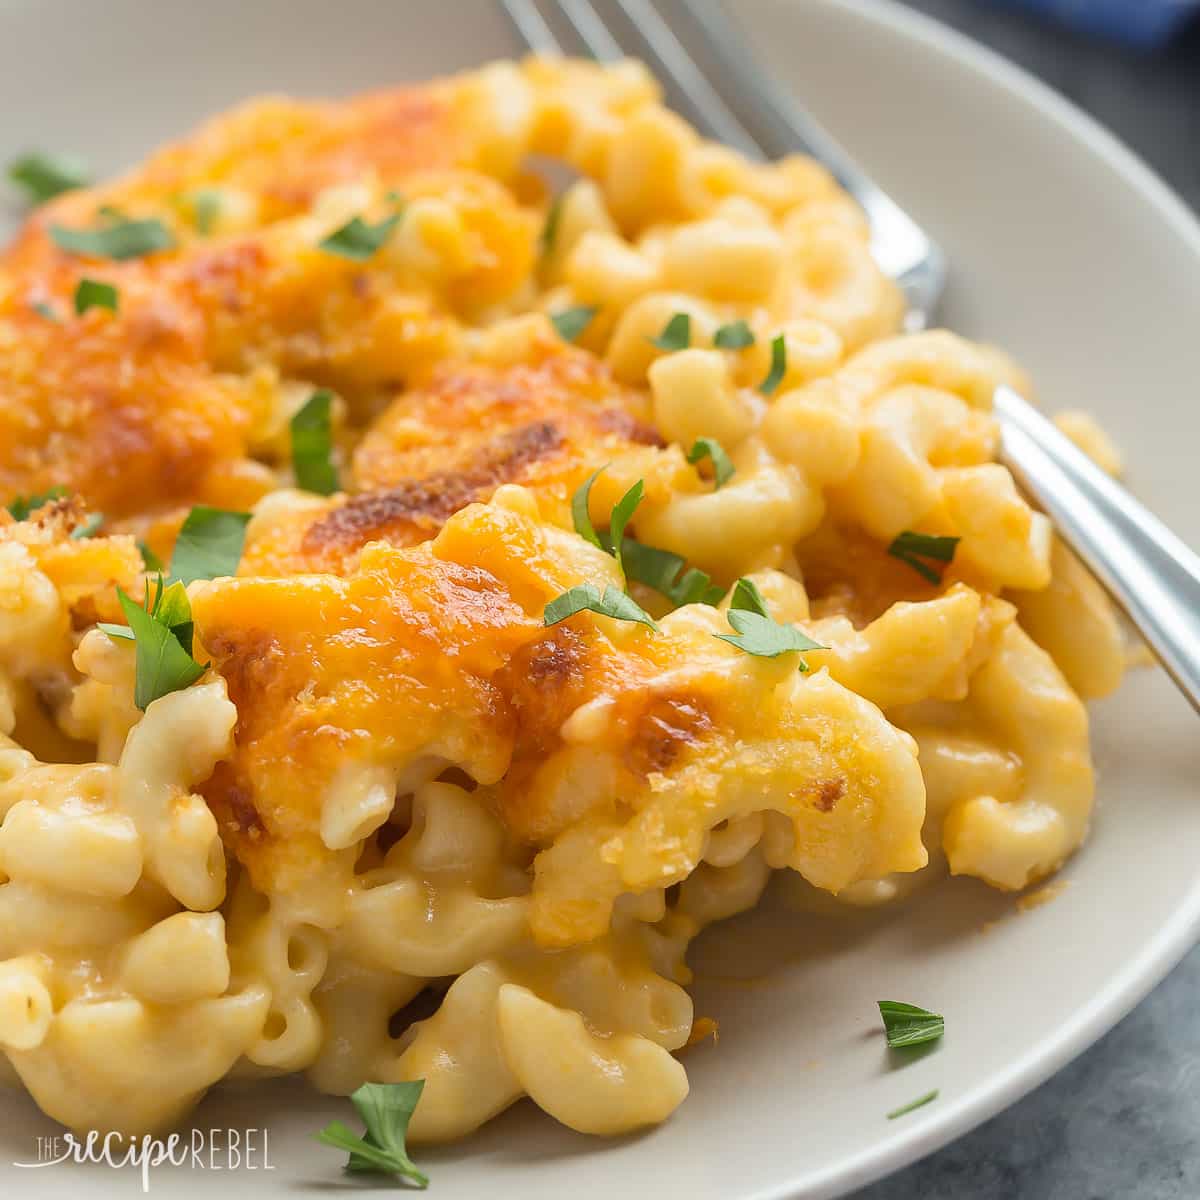 Low fat macaroni and cheese casserole